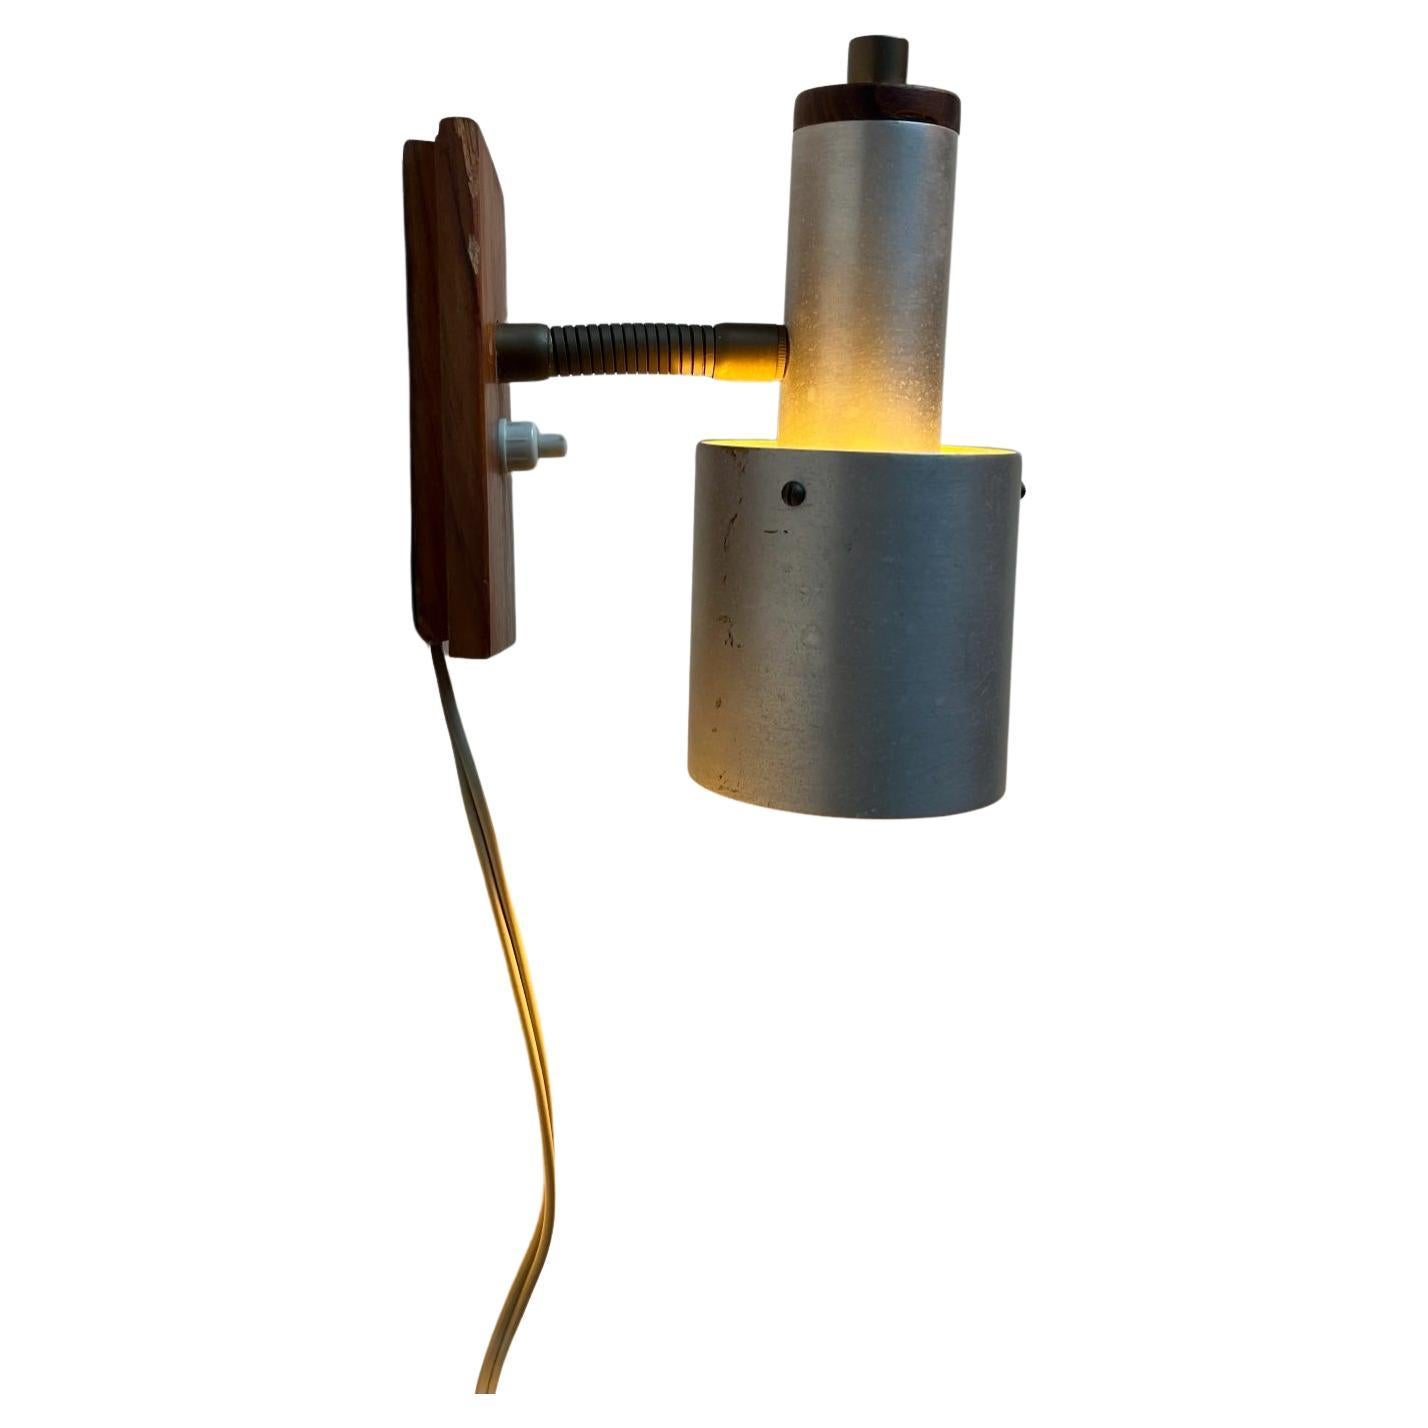 Small adjustable wall lamp made aluminium and teak. It features an adjustable brass goose-neck and on/of switch to its base. It was made in Denmark during the 1960s probably by Lyfa in style reminiscent of Jo Hammerborg - Fog & Mørup. Measurements: